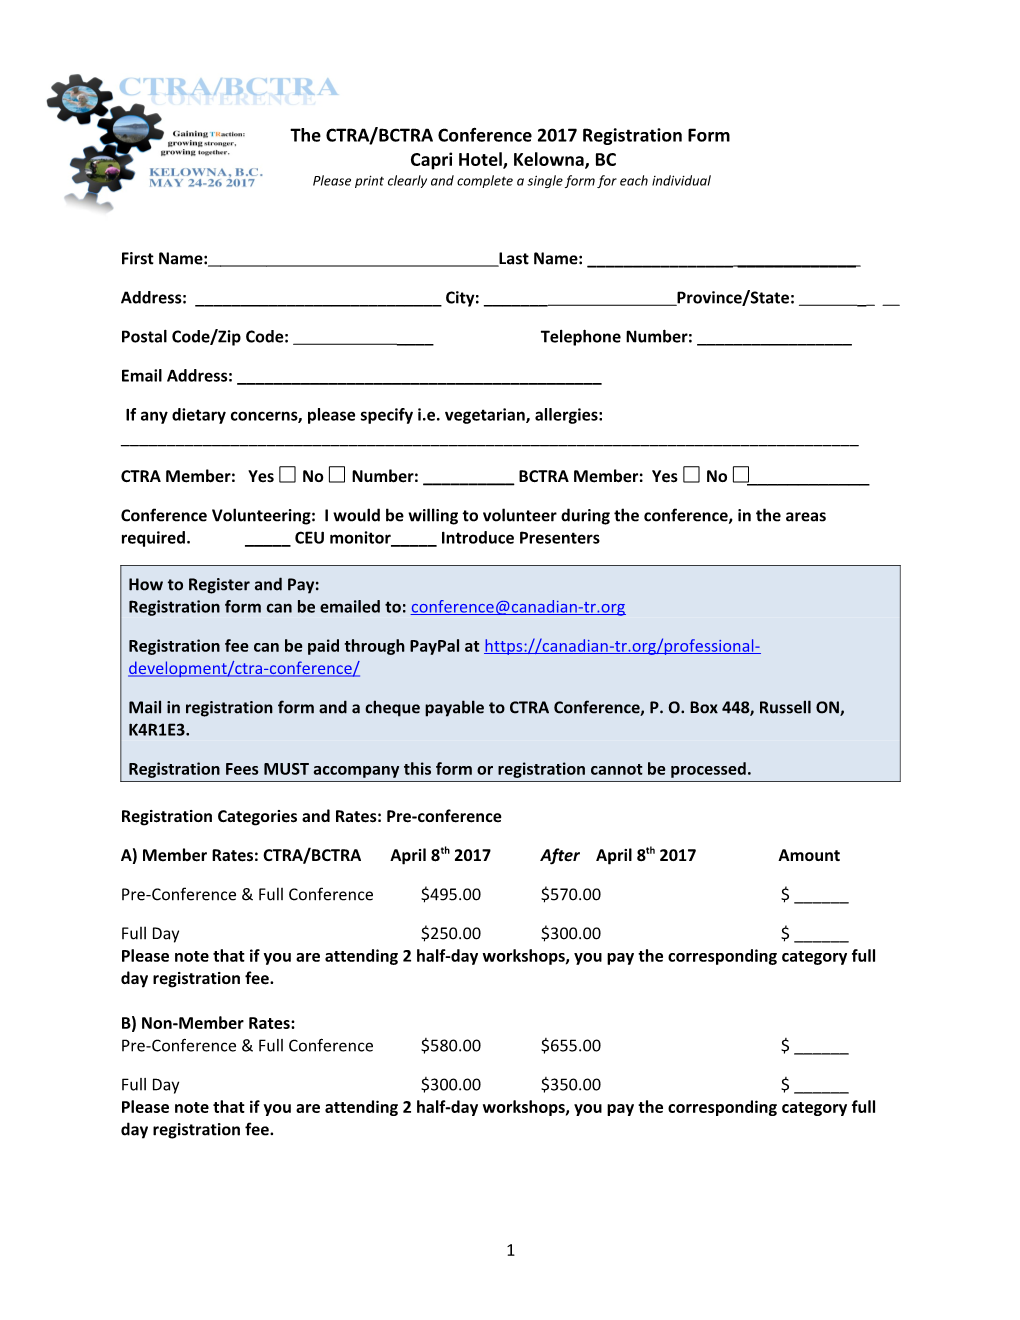 The CTRA Conference 2012 Registration Form Attendee Information: Please Print Clearly And